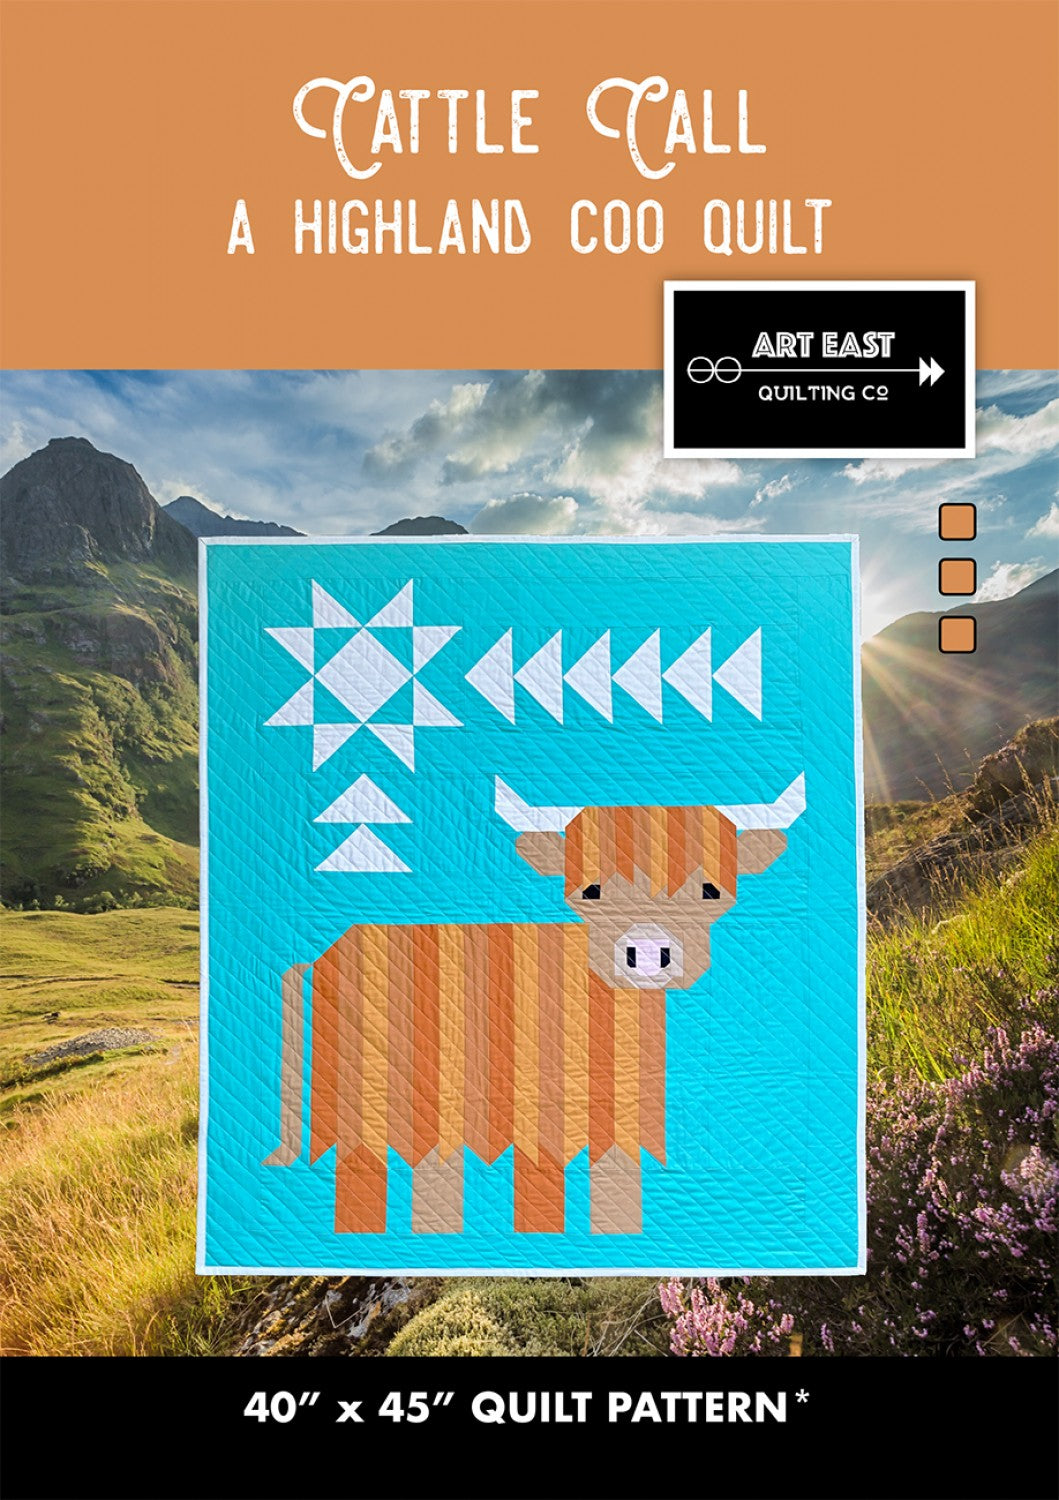 Cattle Call A Highland Cow Quilt Pattern from Art East Quilting